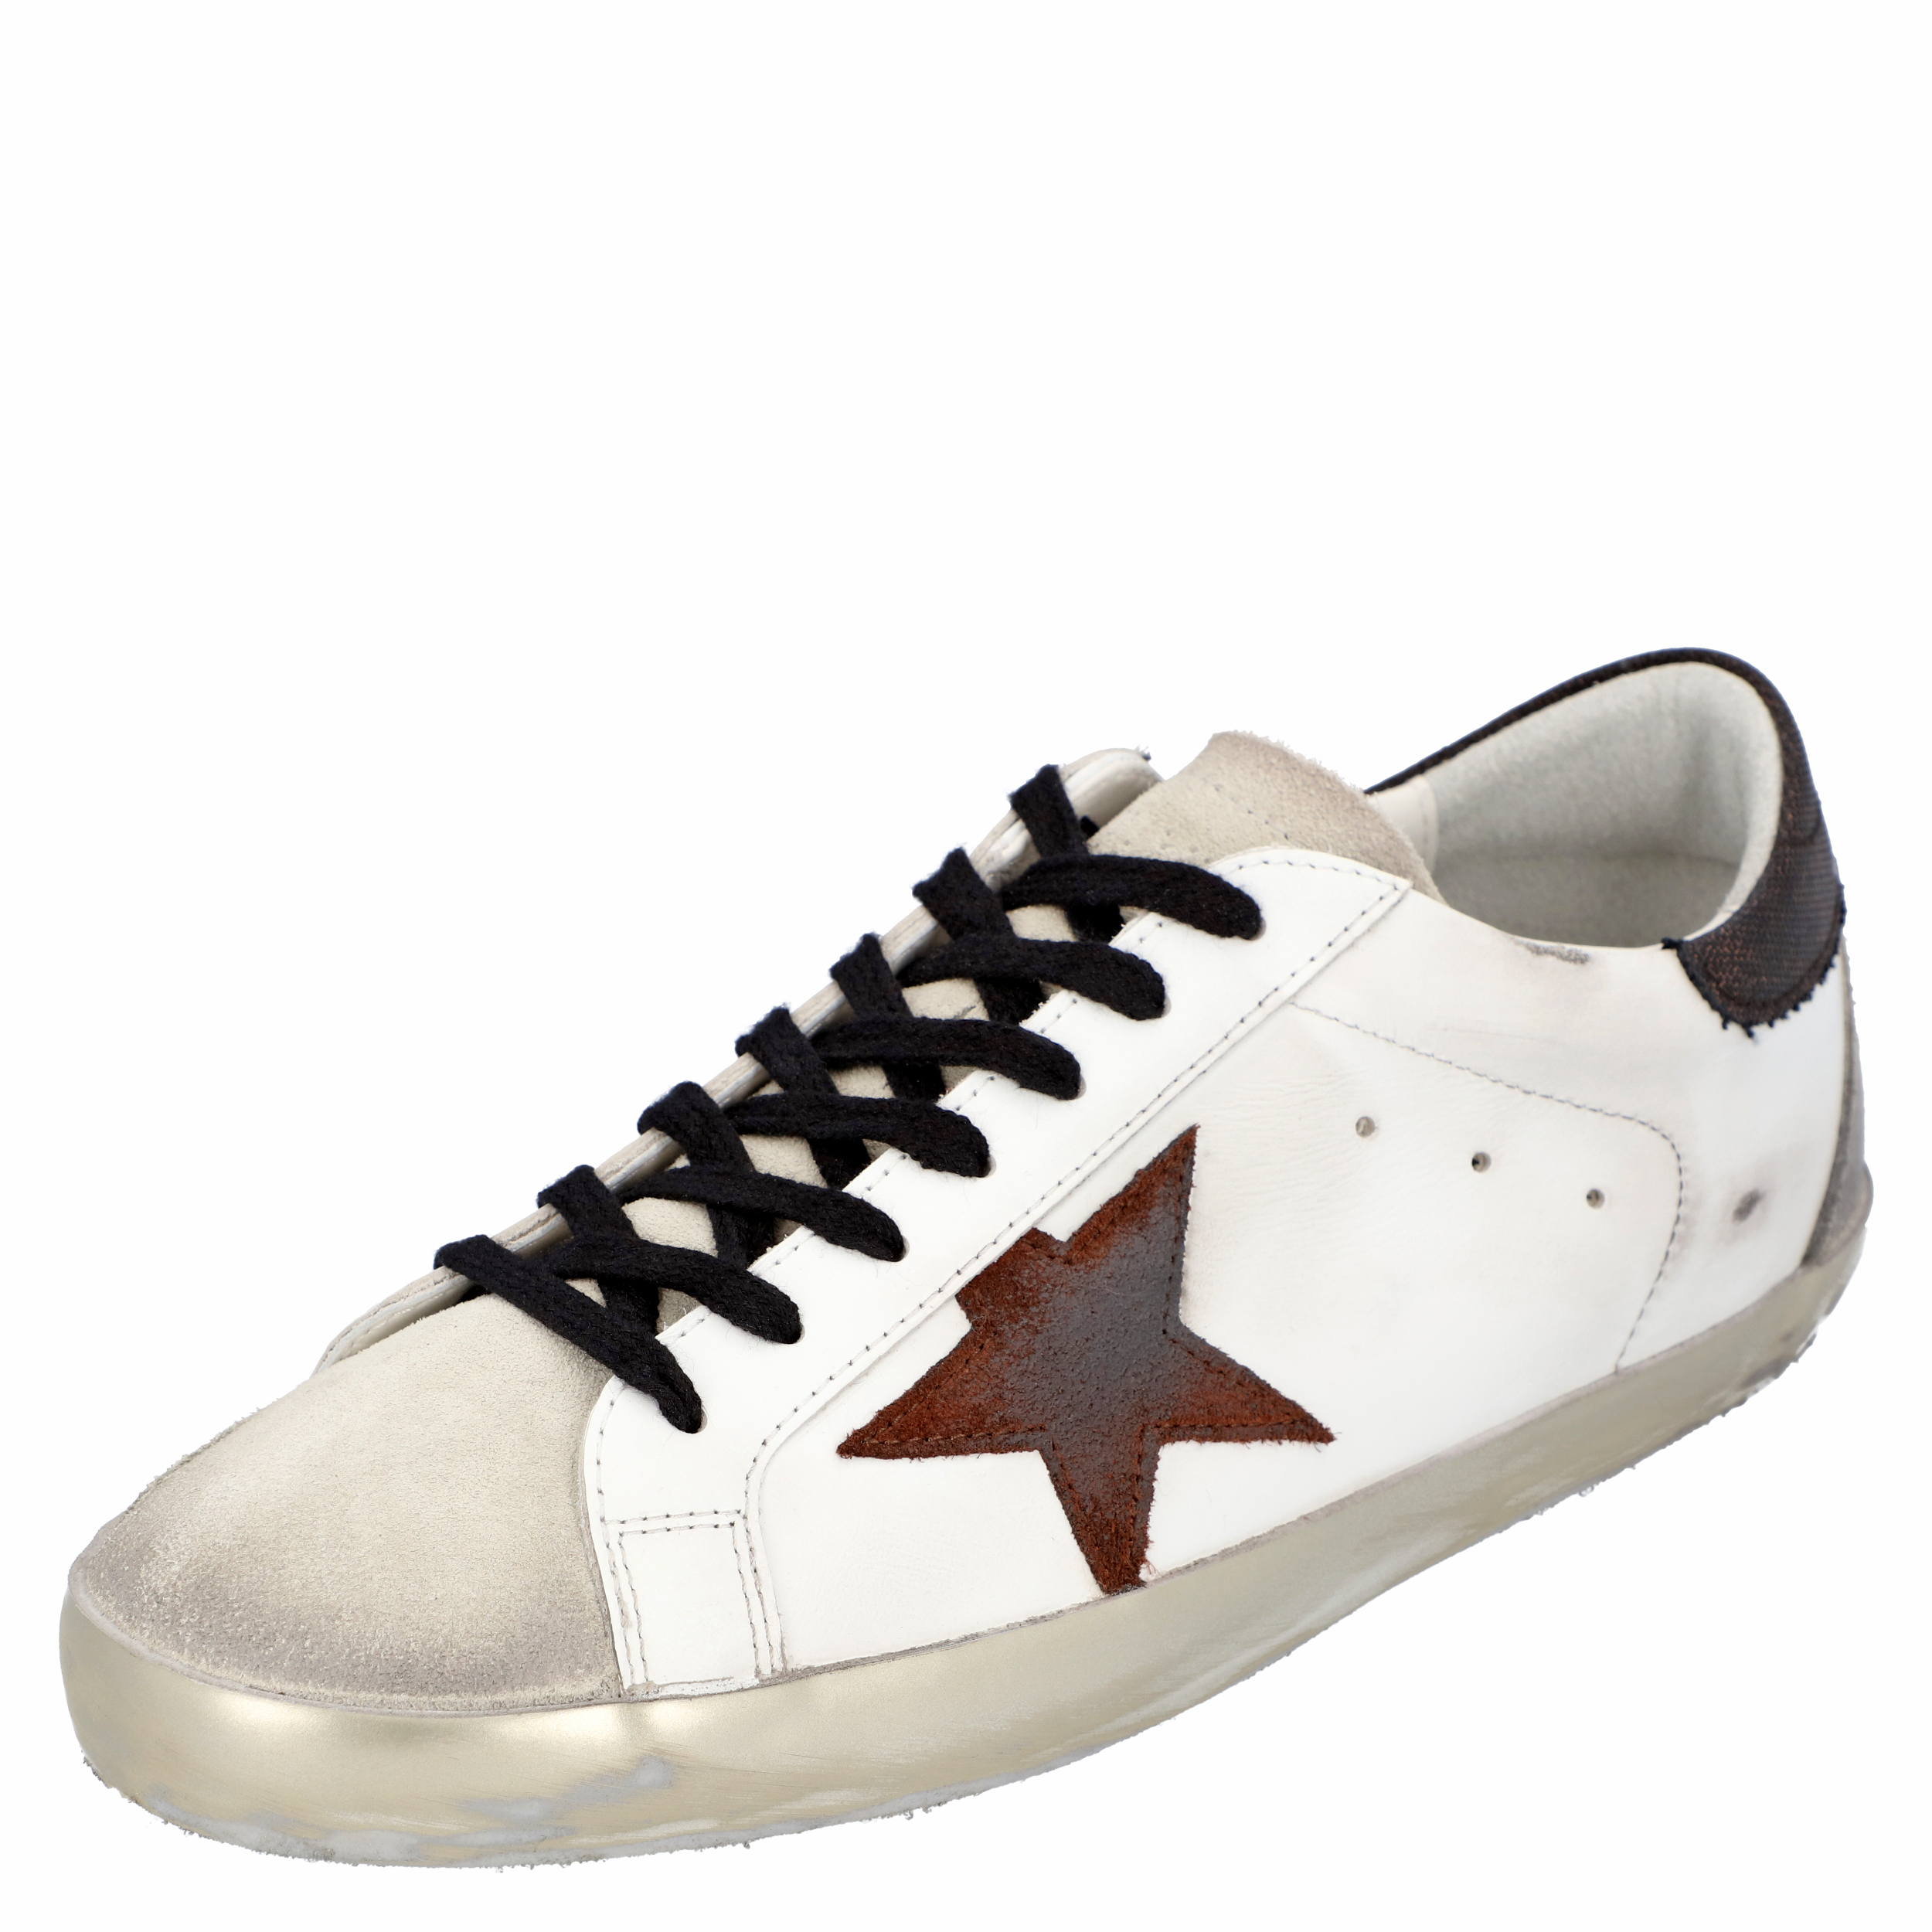 Golden Goose White/Black/Red Leather Superstar Sneakers Size EU 43